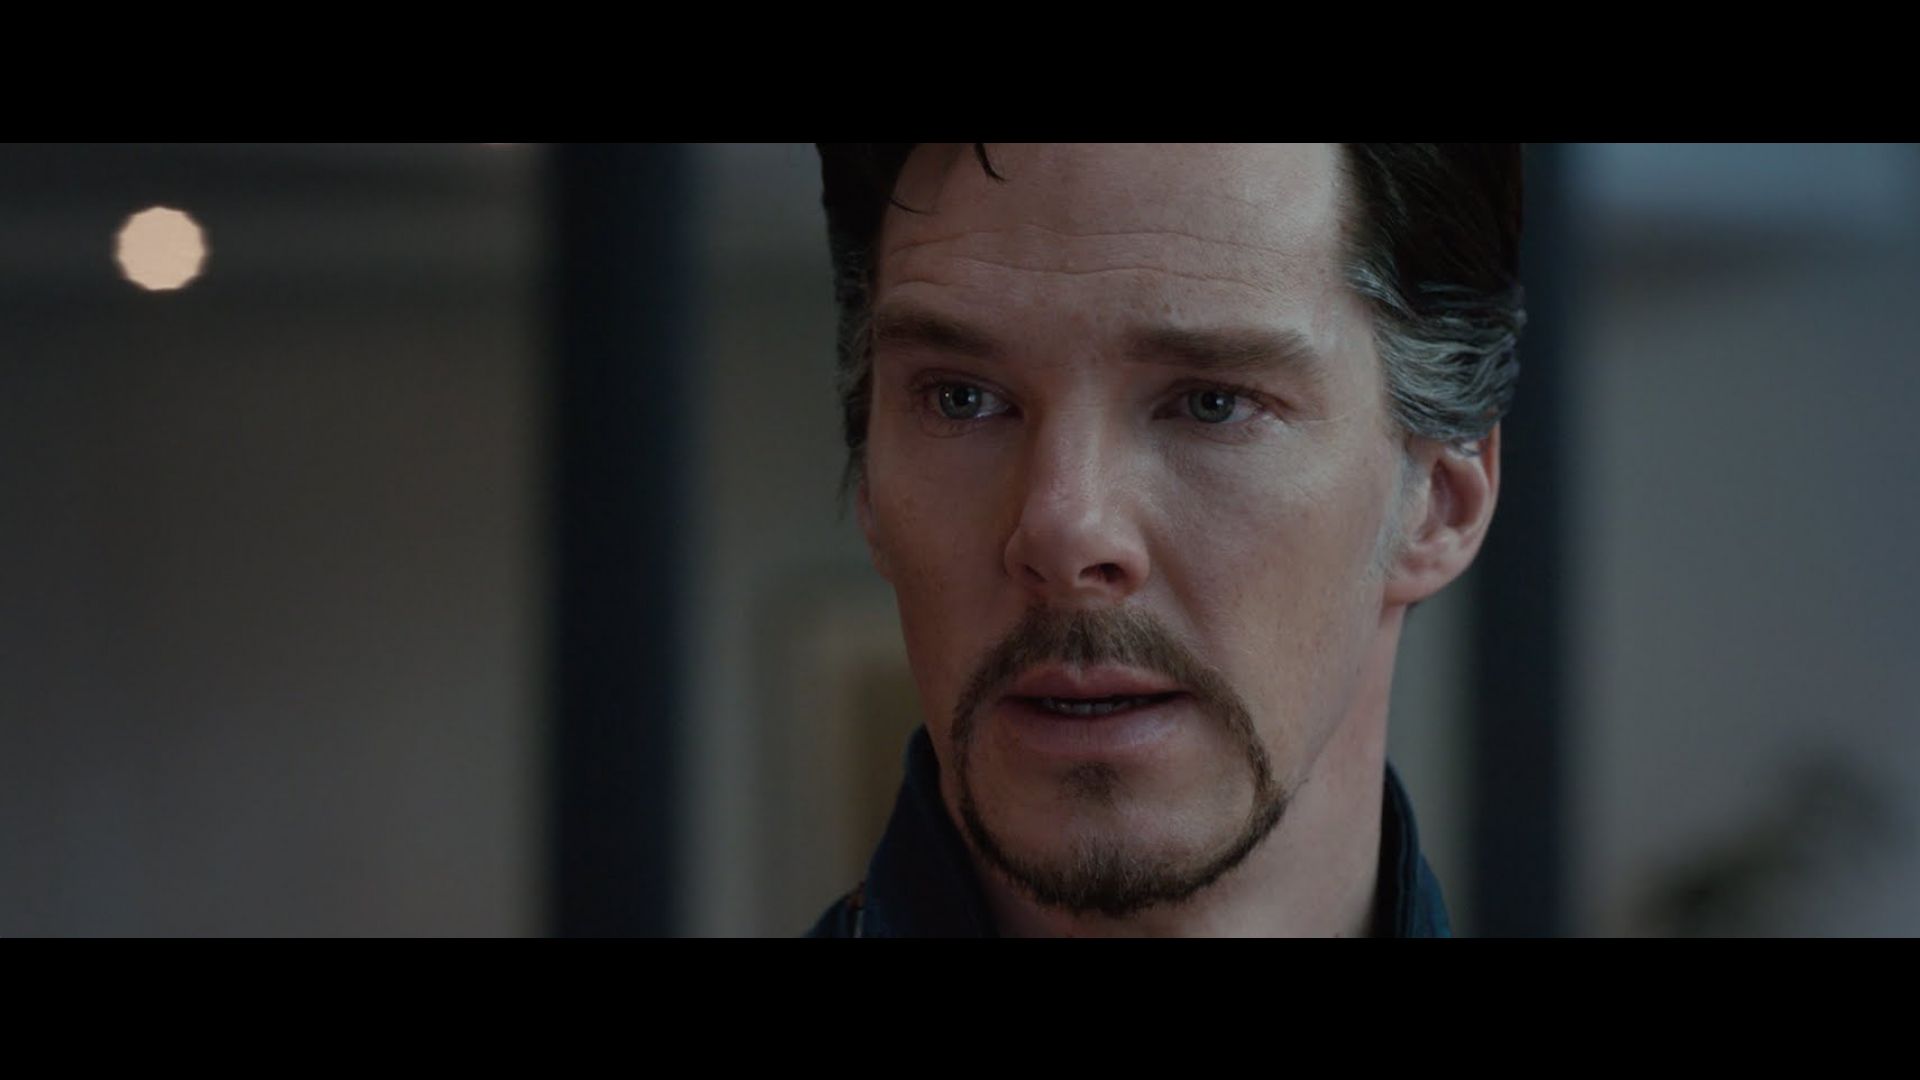 And here&#039;s our second trailer for Marvel&#039;s &#039;Doctor Strange&#039;